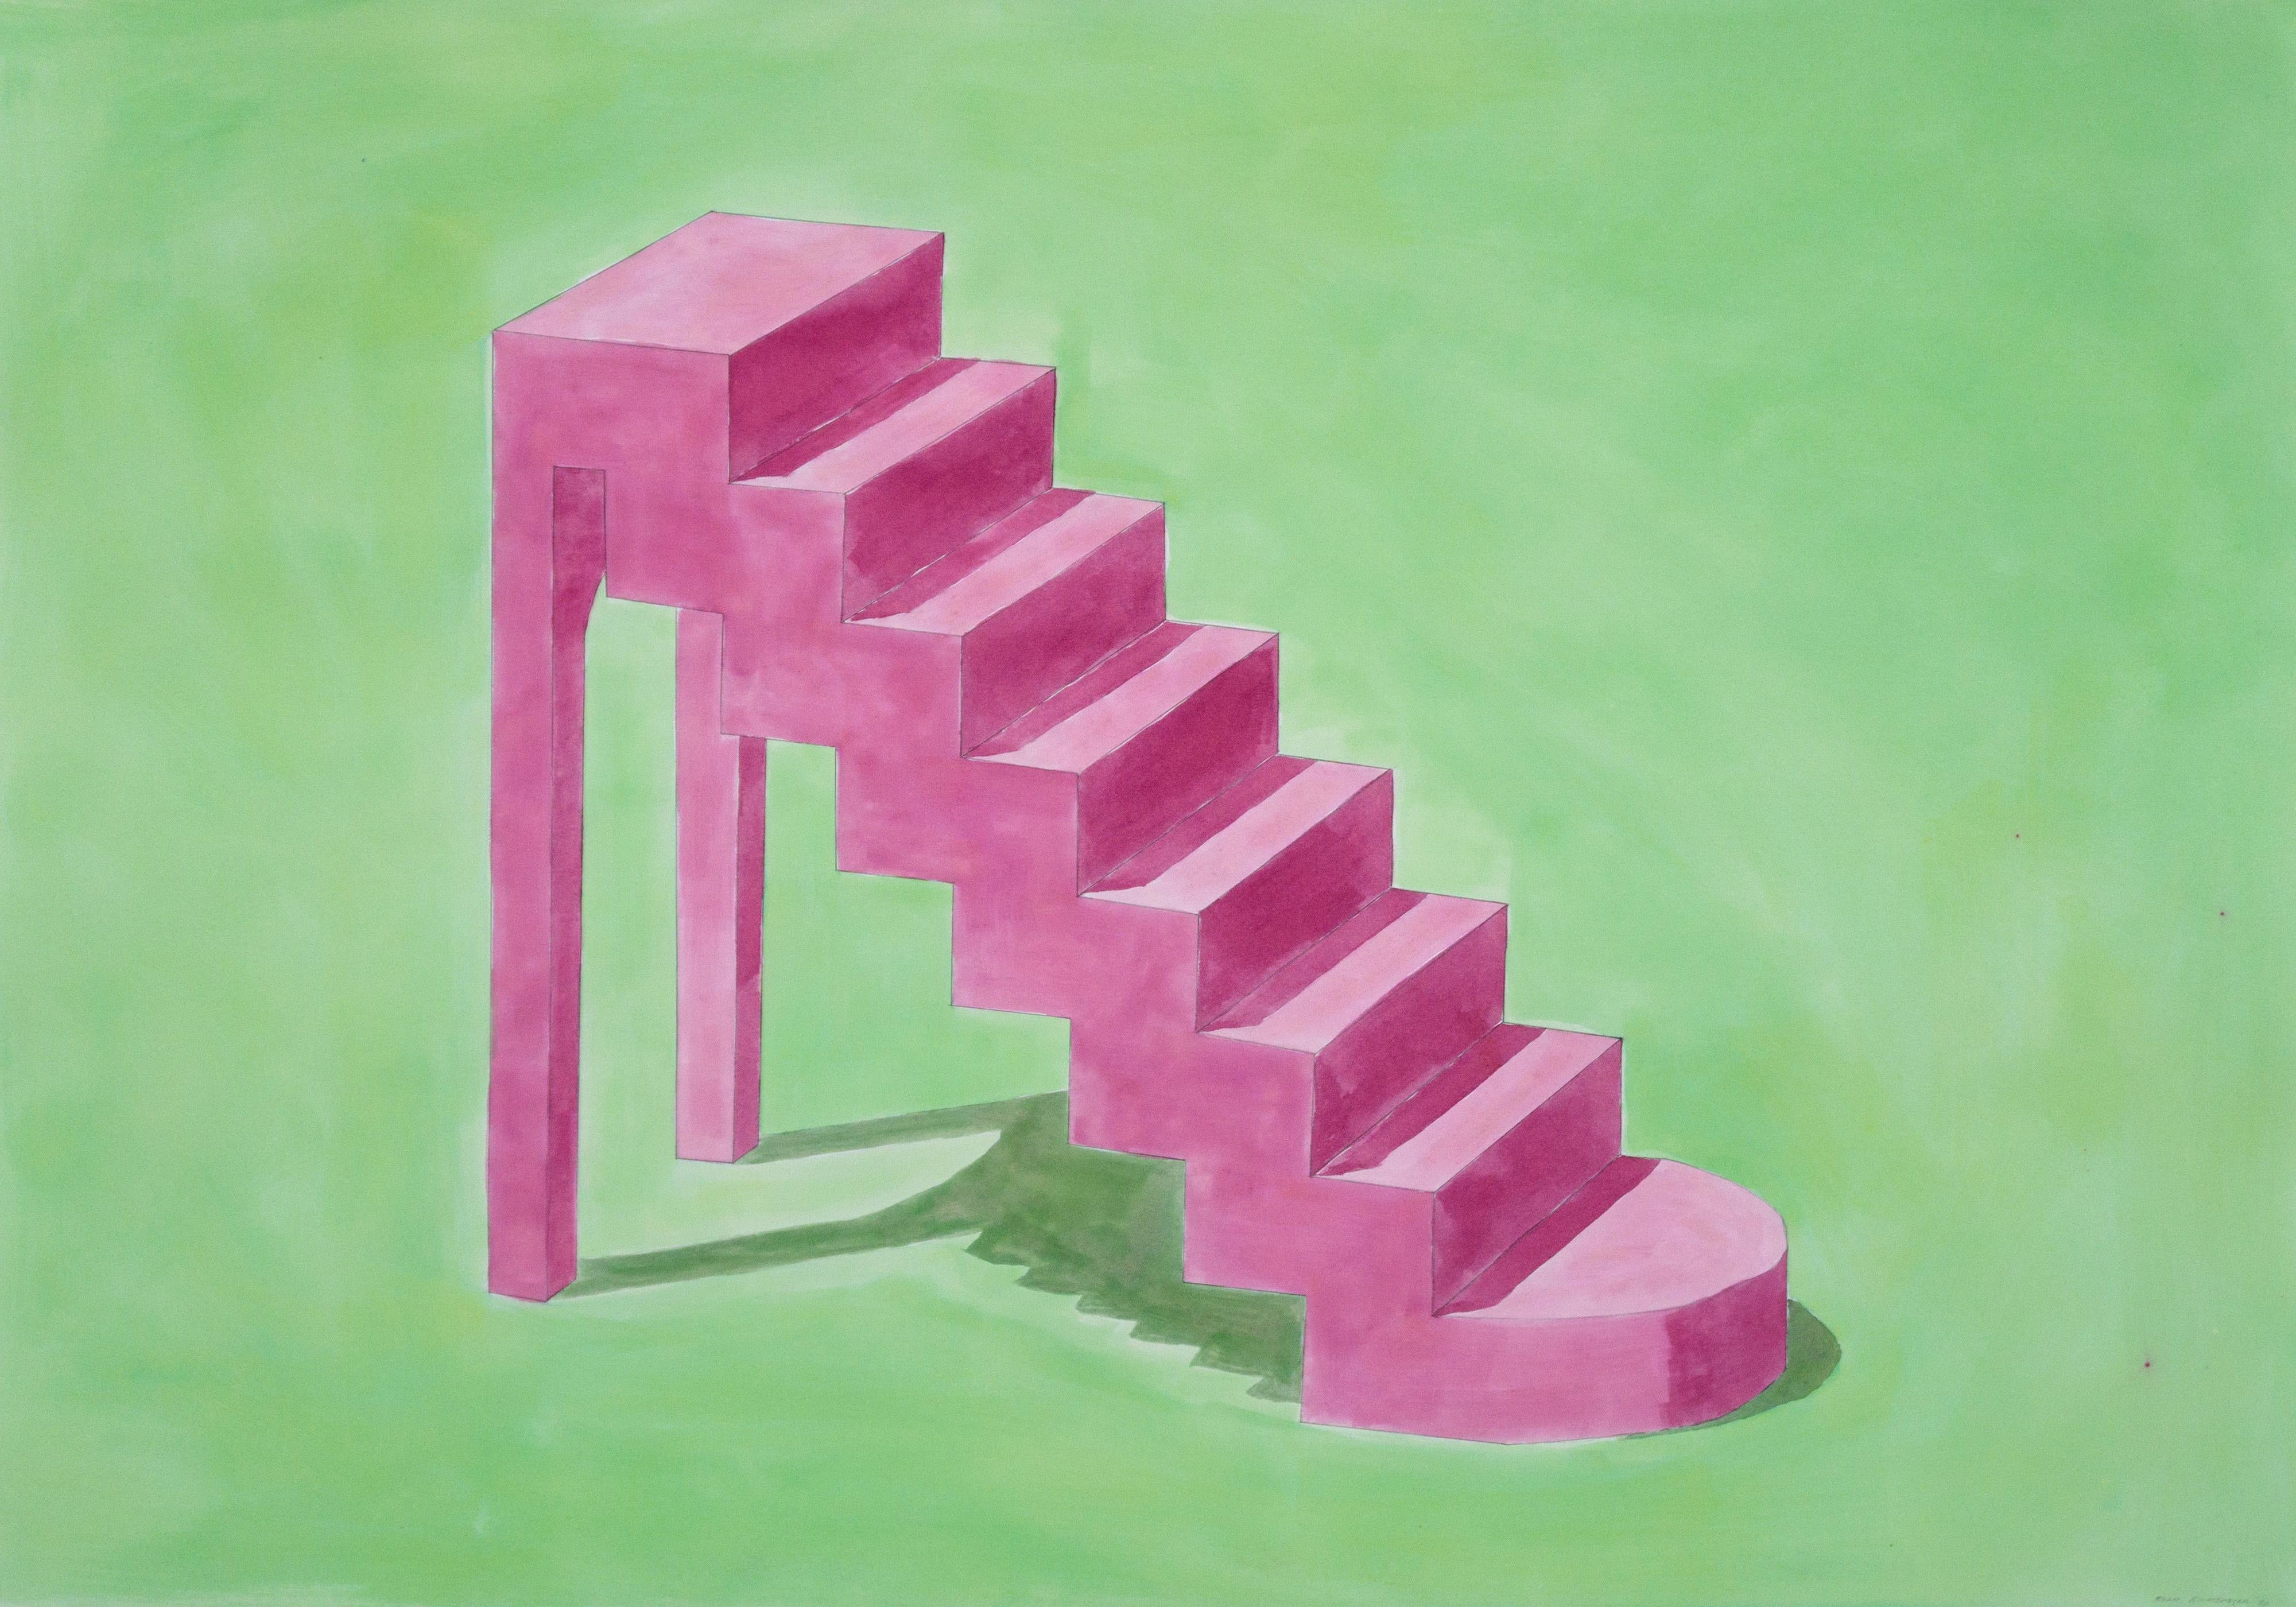 Ryan Rivadeneyra Still-Life - "High Heel Staircase", Watercolor on Paper, 100x70cm, Fashion, Architecture